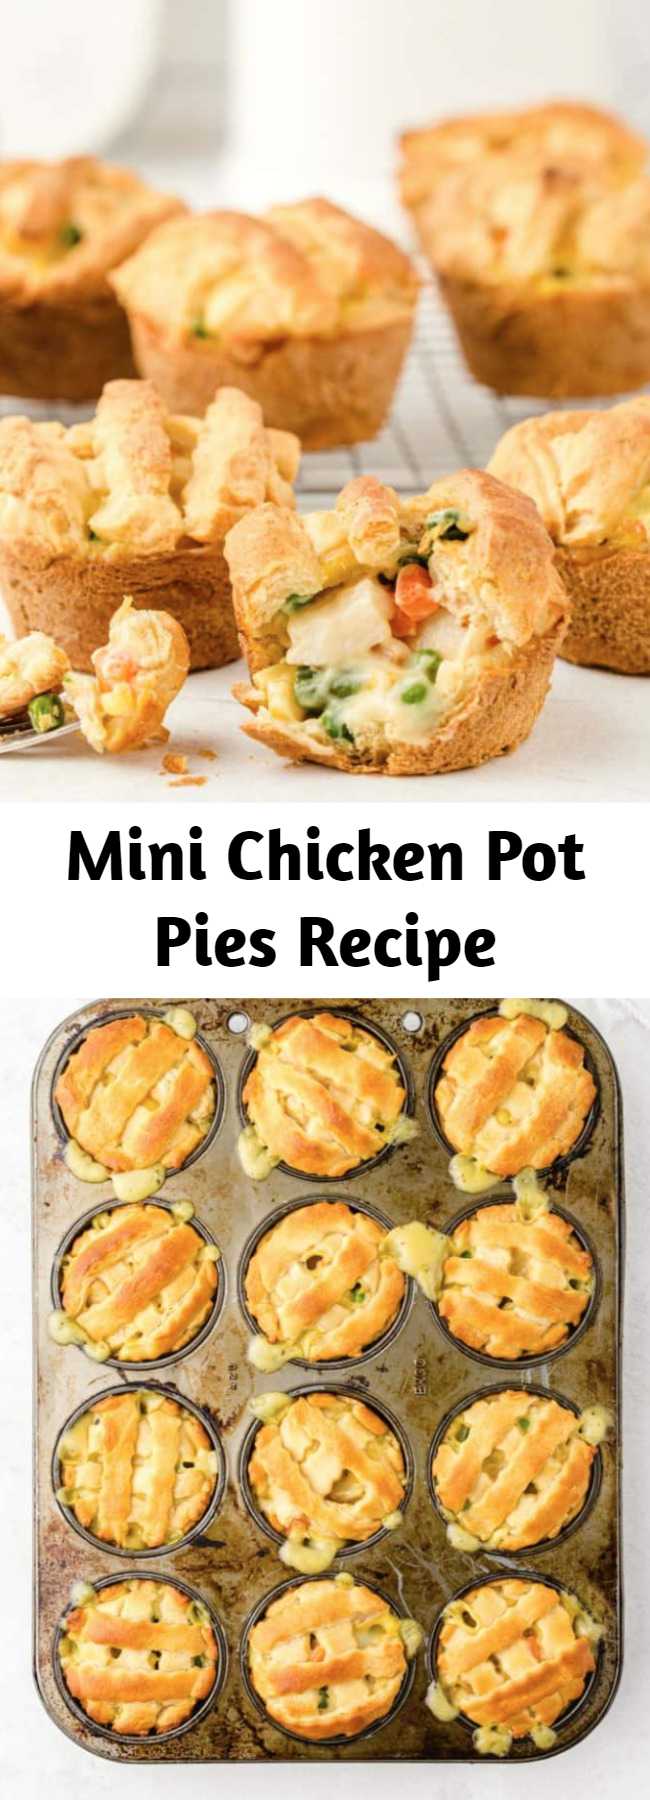 Mini Chicken Pot Pies Recipe - These Mini-Chicken Pot Pies are the perfect comfort food! Perfectly portioned, only need 5-ingredients and they can be ready in just about 30 minutes. Serve them as a delicious bite-sized appetizer or pair them with a small salad for a fun and easy family dinner!